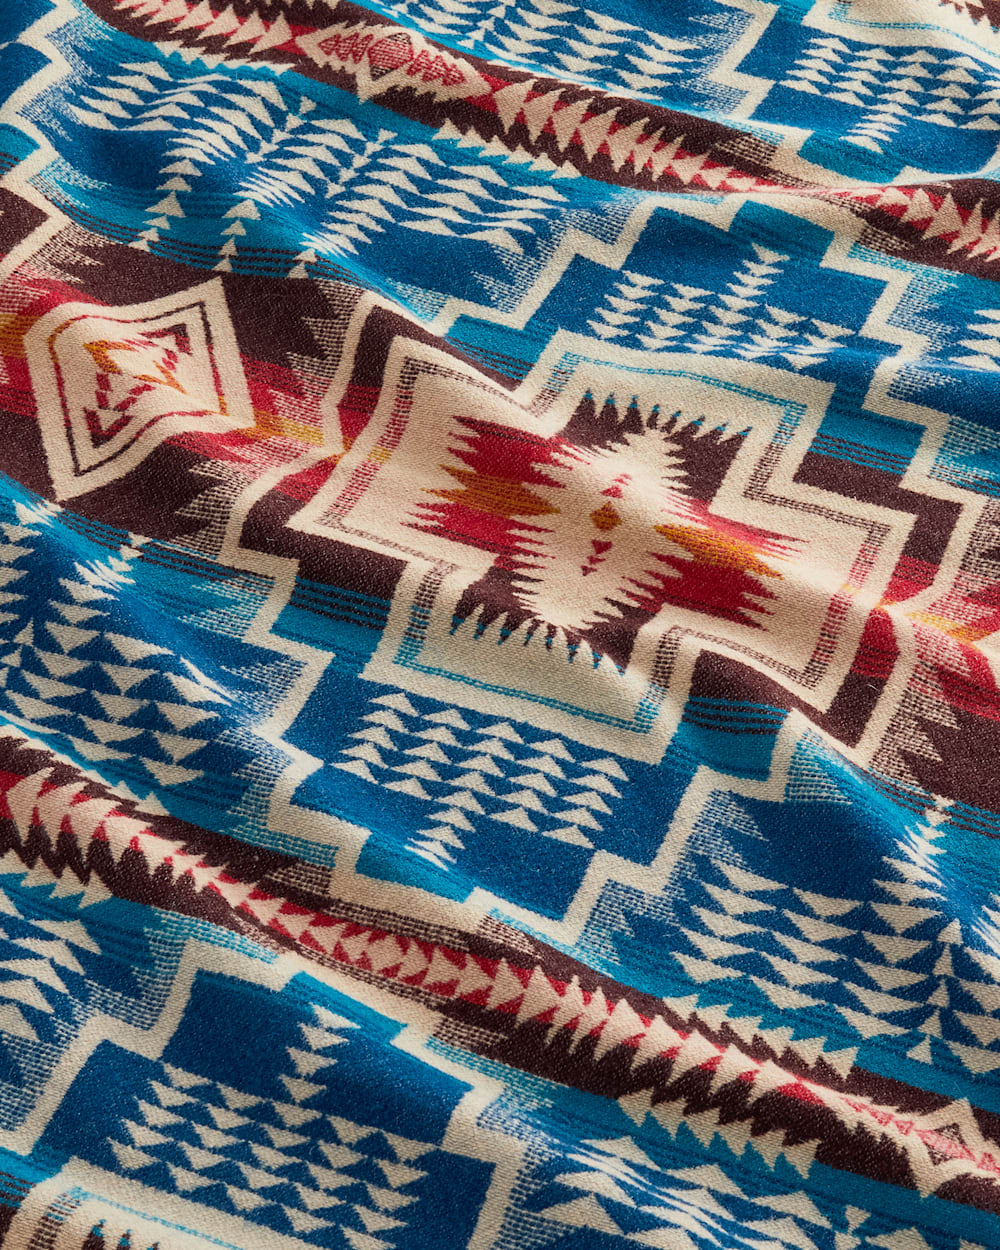 ALTERNATE VIEW OF HARDING STAR FRINGED THROW IN ROYAL BLUE image number 3